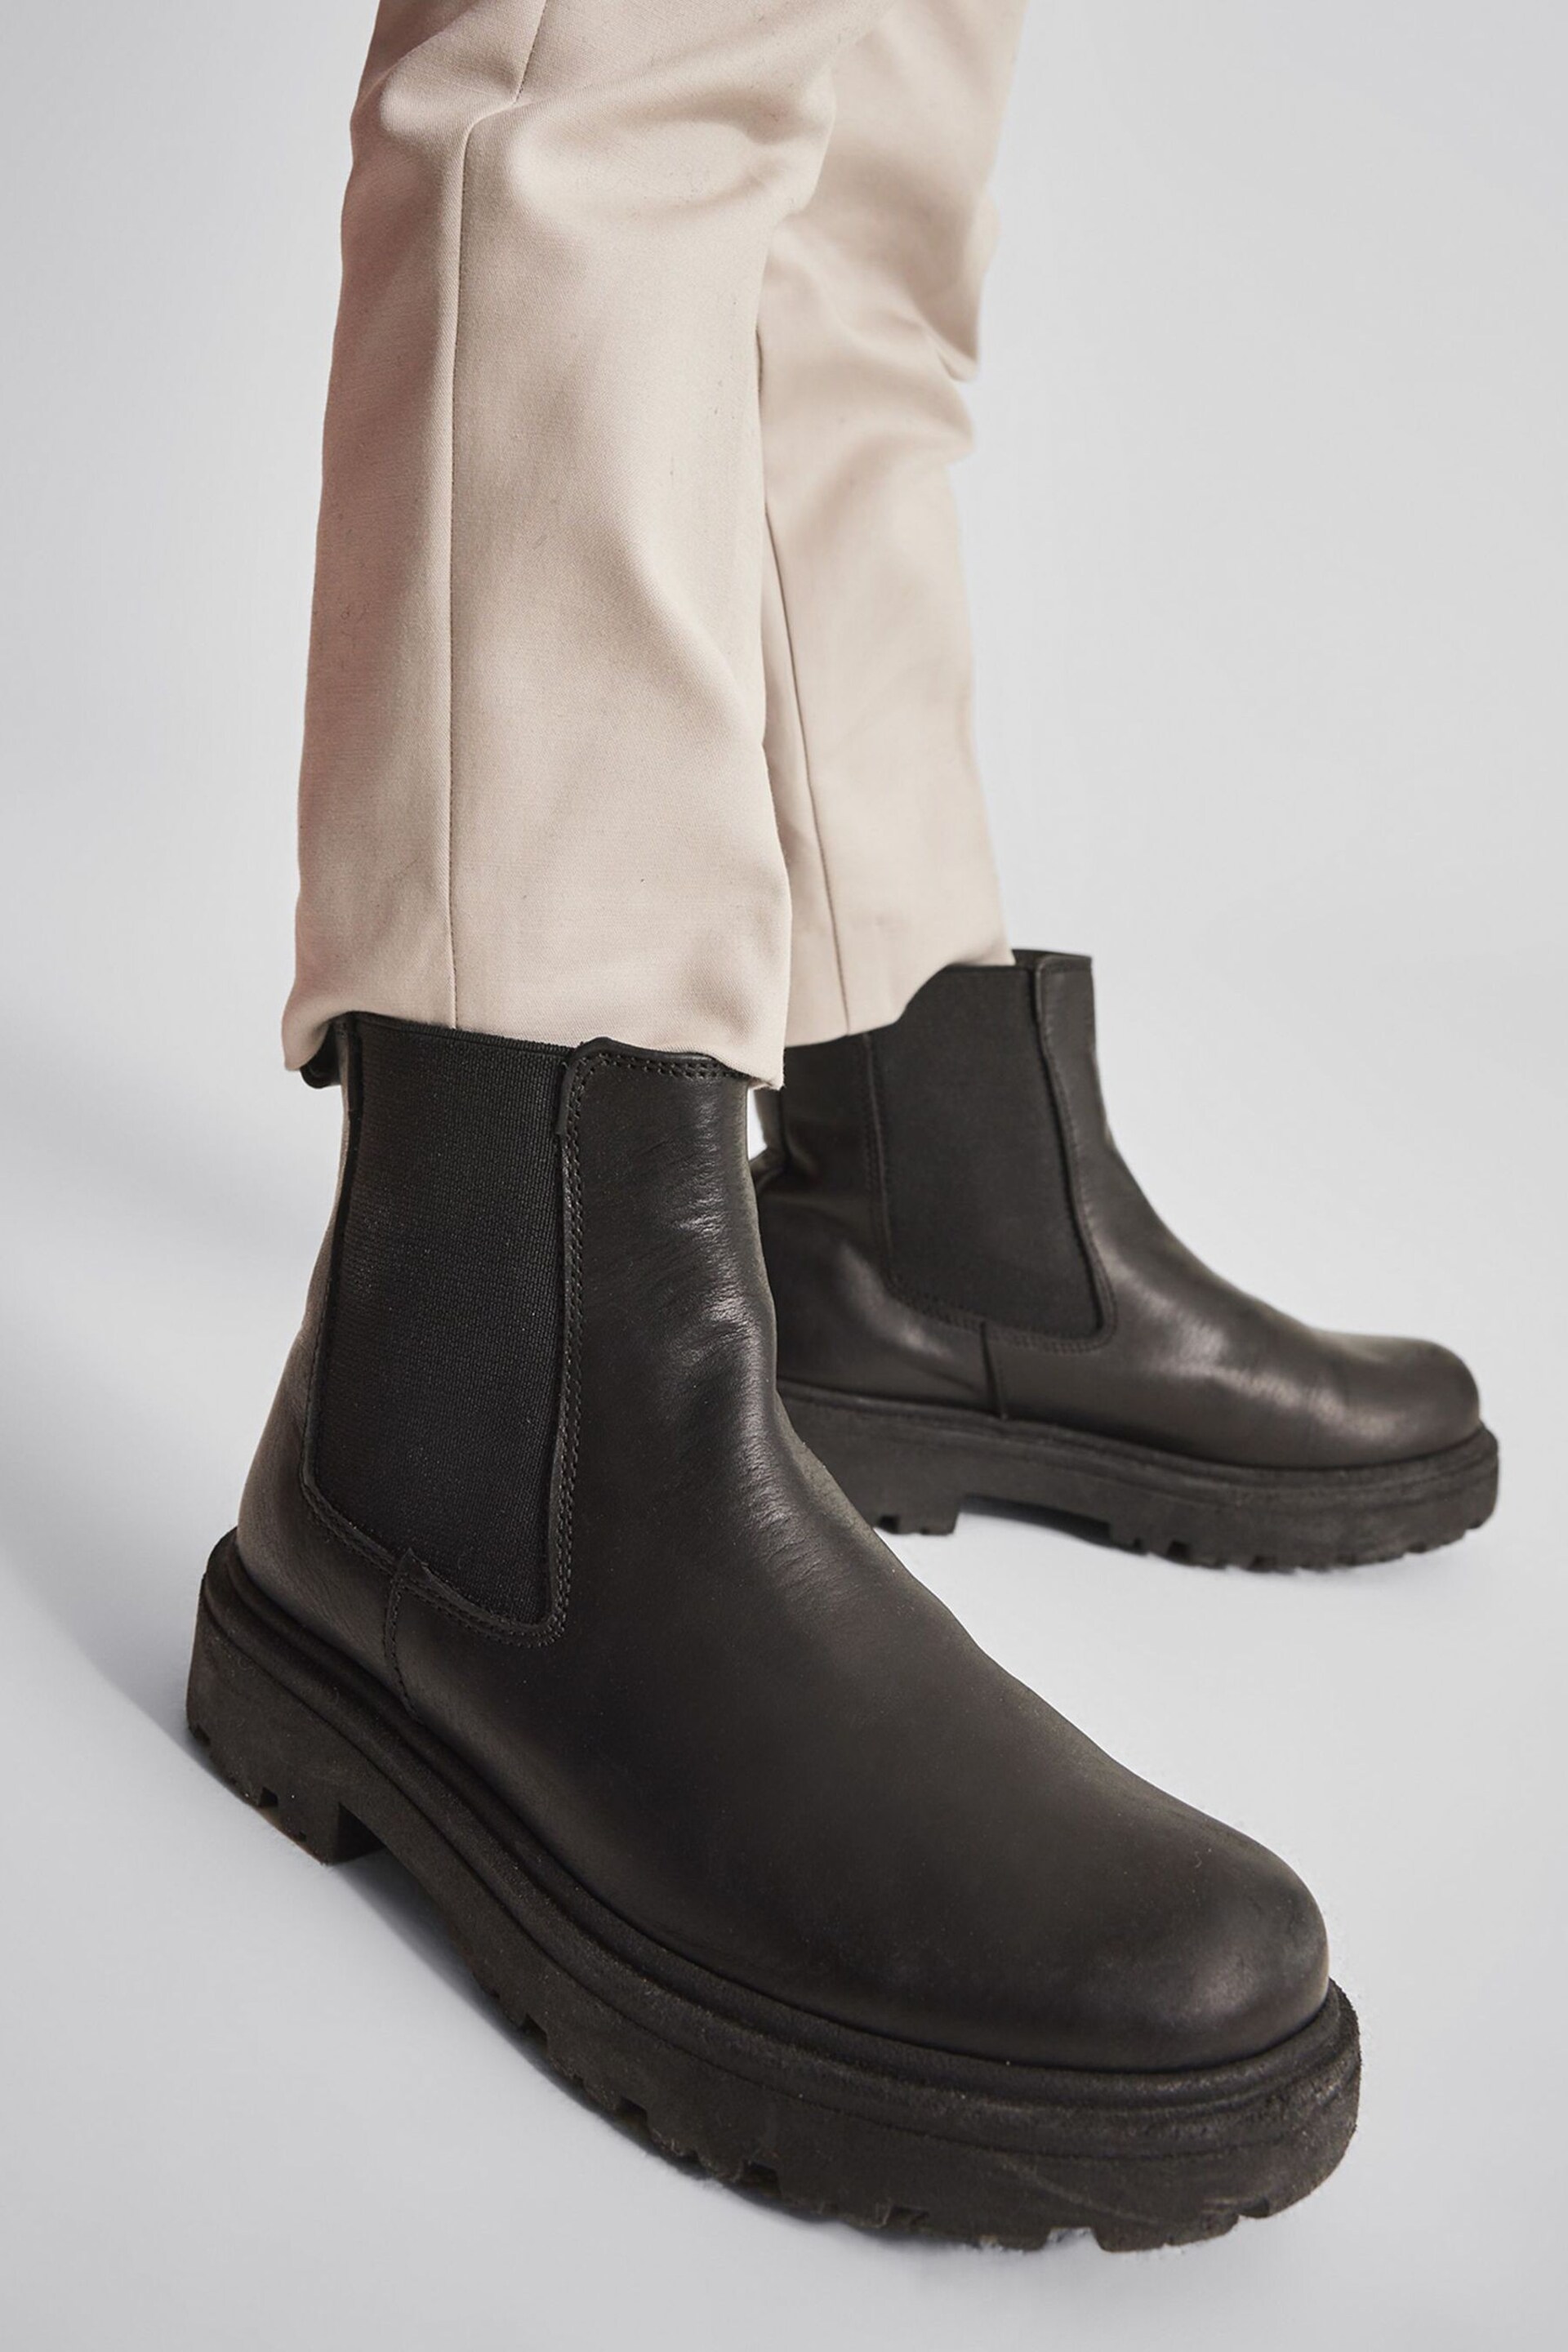 Reiss Black Taylor Junior Leather Chelsea Boots - Image 7 of 7